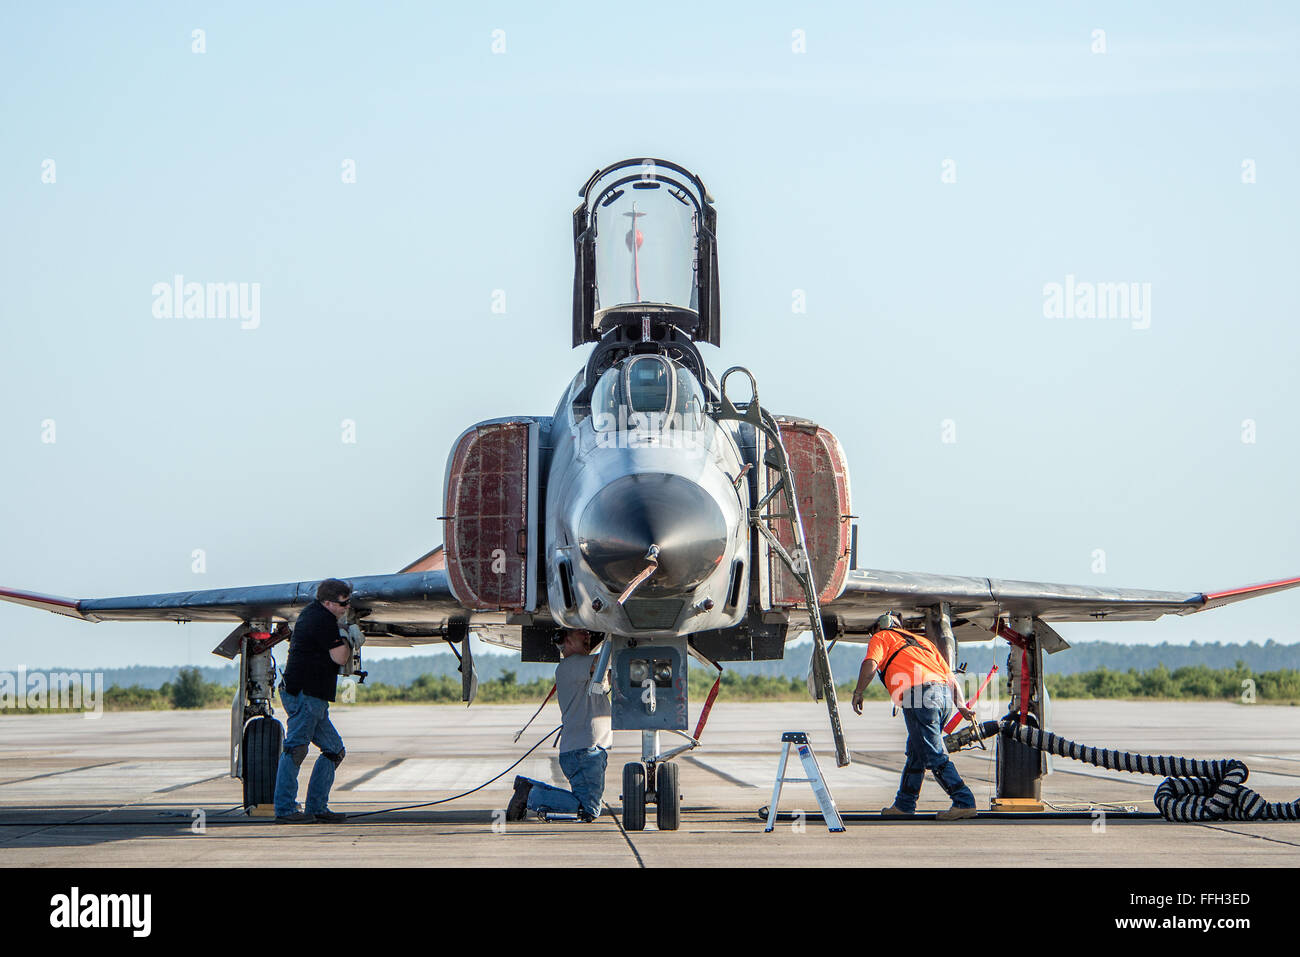 Members of the 82nd Aerial Target Squadron at Tyndall Air Force Base, Florida, prepare a QF-4 Phantom for a mission. The Q-F4 is an F-4 Phantom that has been converted to a remotely piloted aircraft for use as an aerial target. Stock Photo